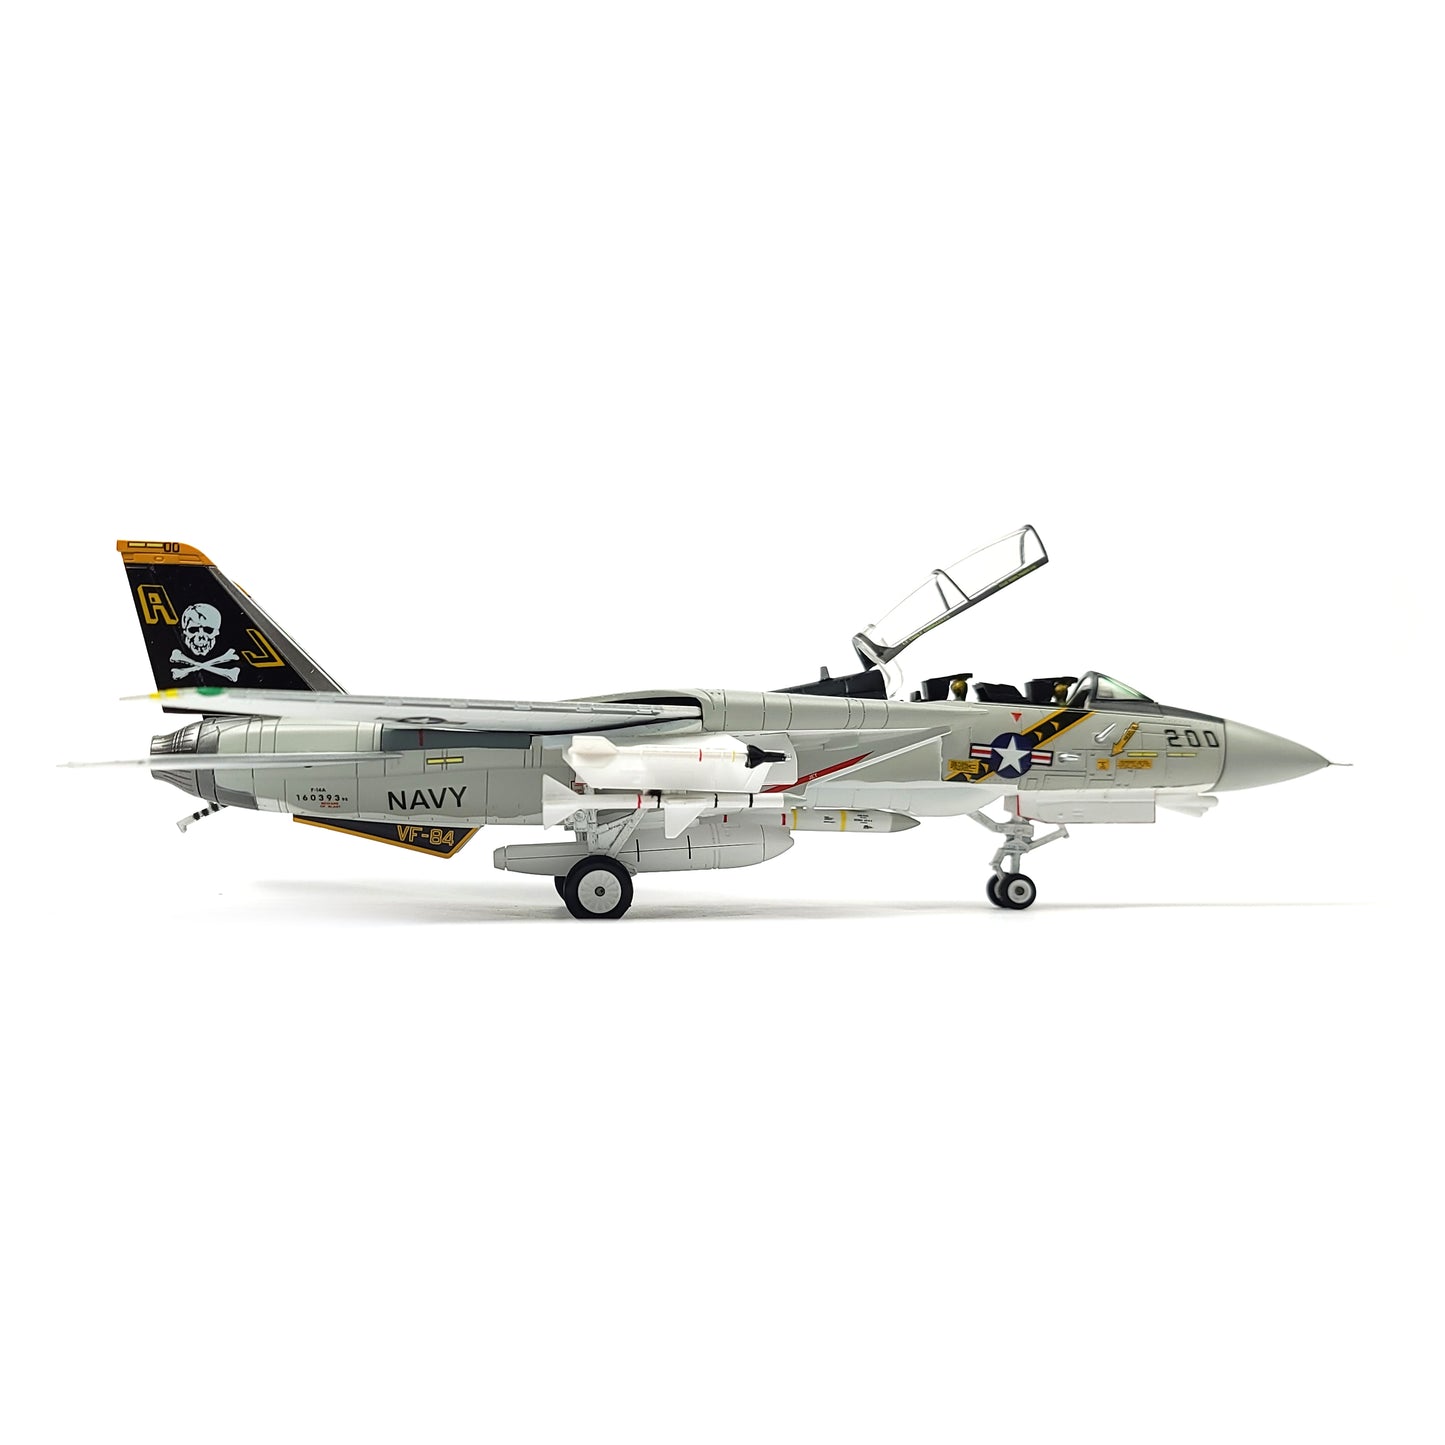 NUOTIE US Navy F-14 Tomcat 1/72 Alloy Model VF-84 Jolly Rogers Fighter DieCast Metal Airplane Military Display Model Collection or Gift